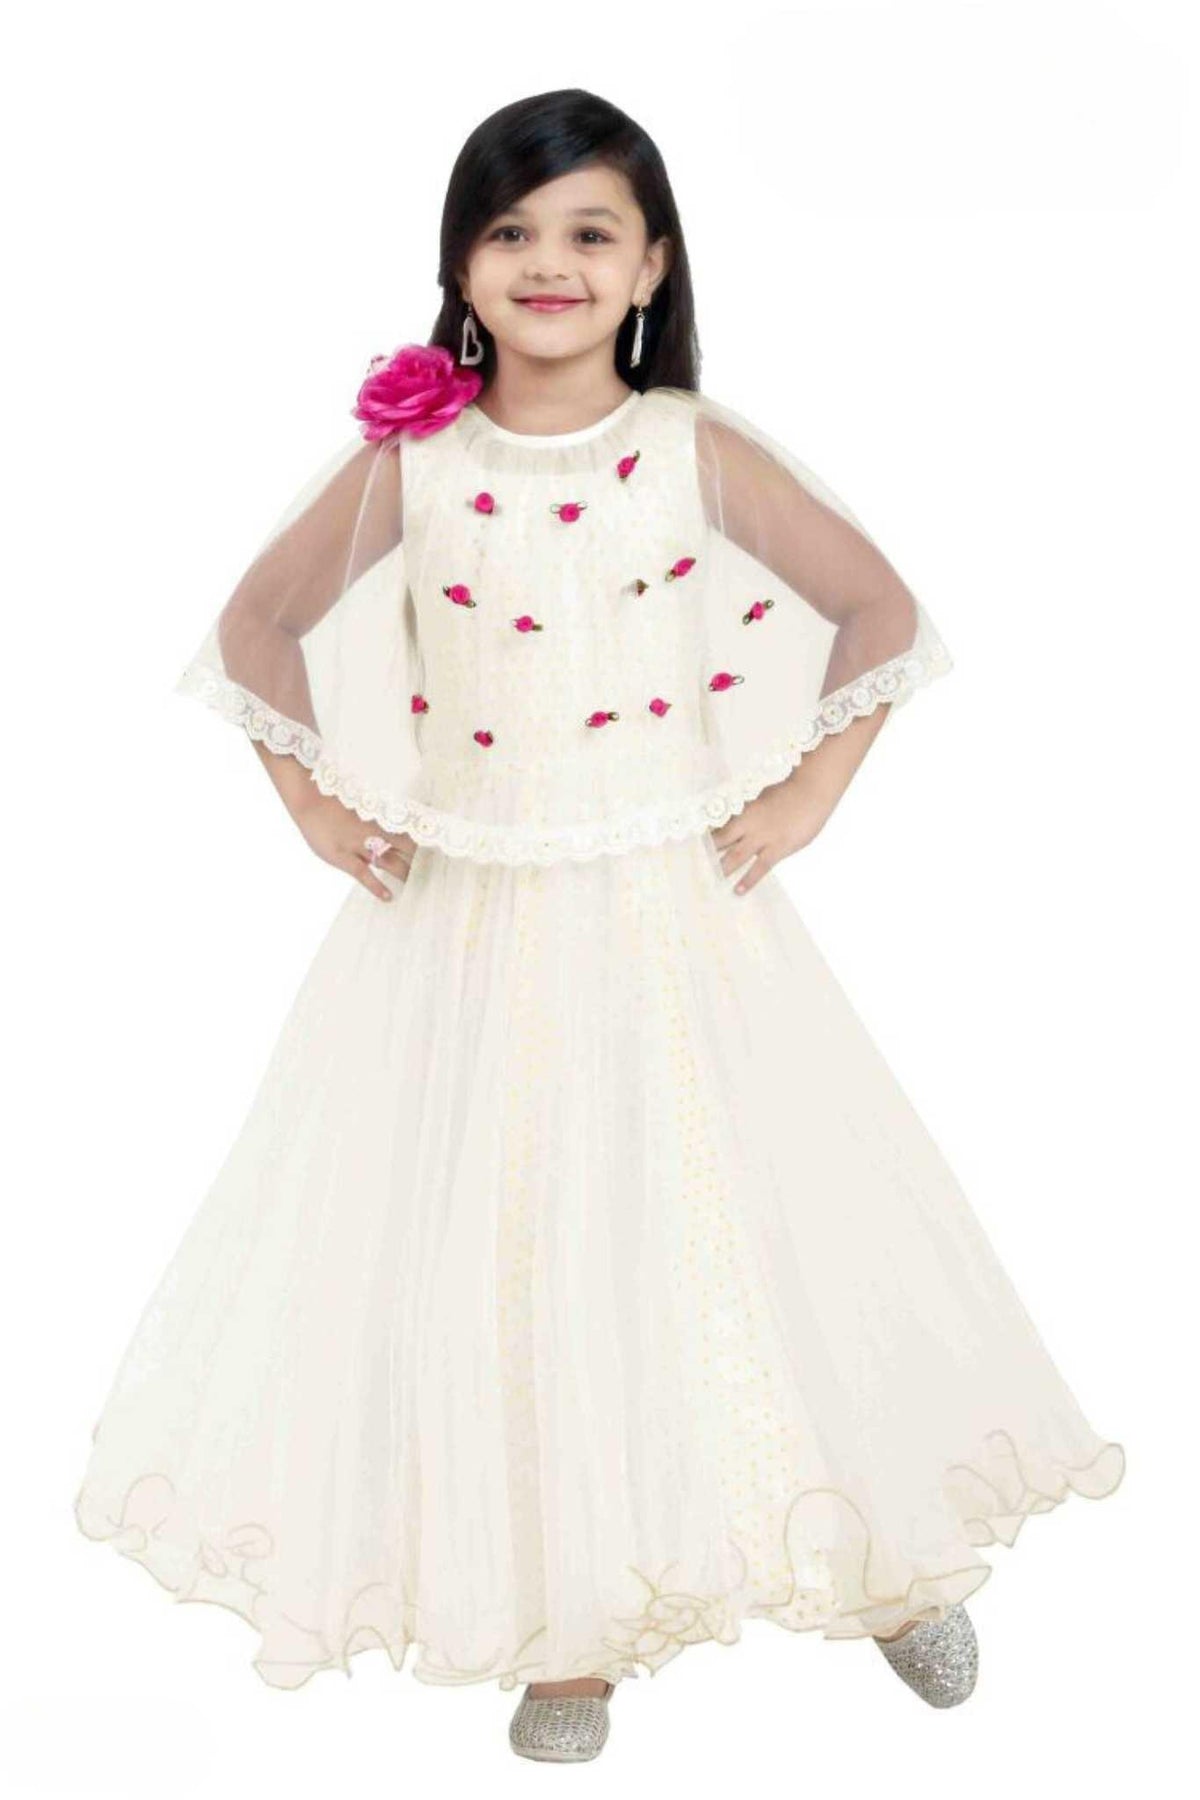 White Gown With Netted Cape And Embellished Pink Flowers For Girls - Lagorii Kids